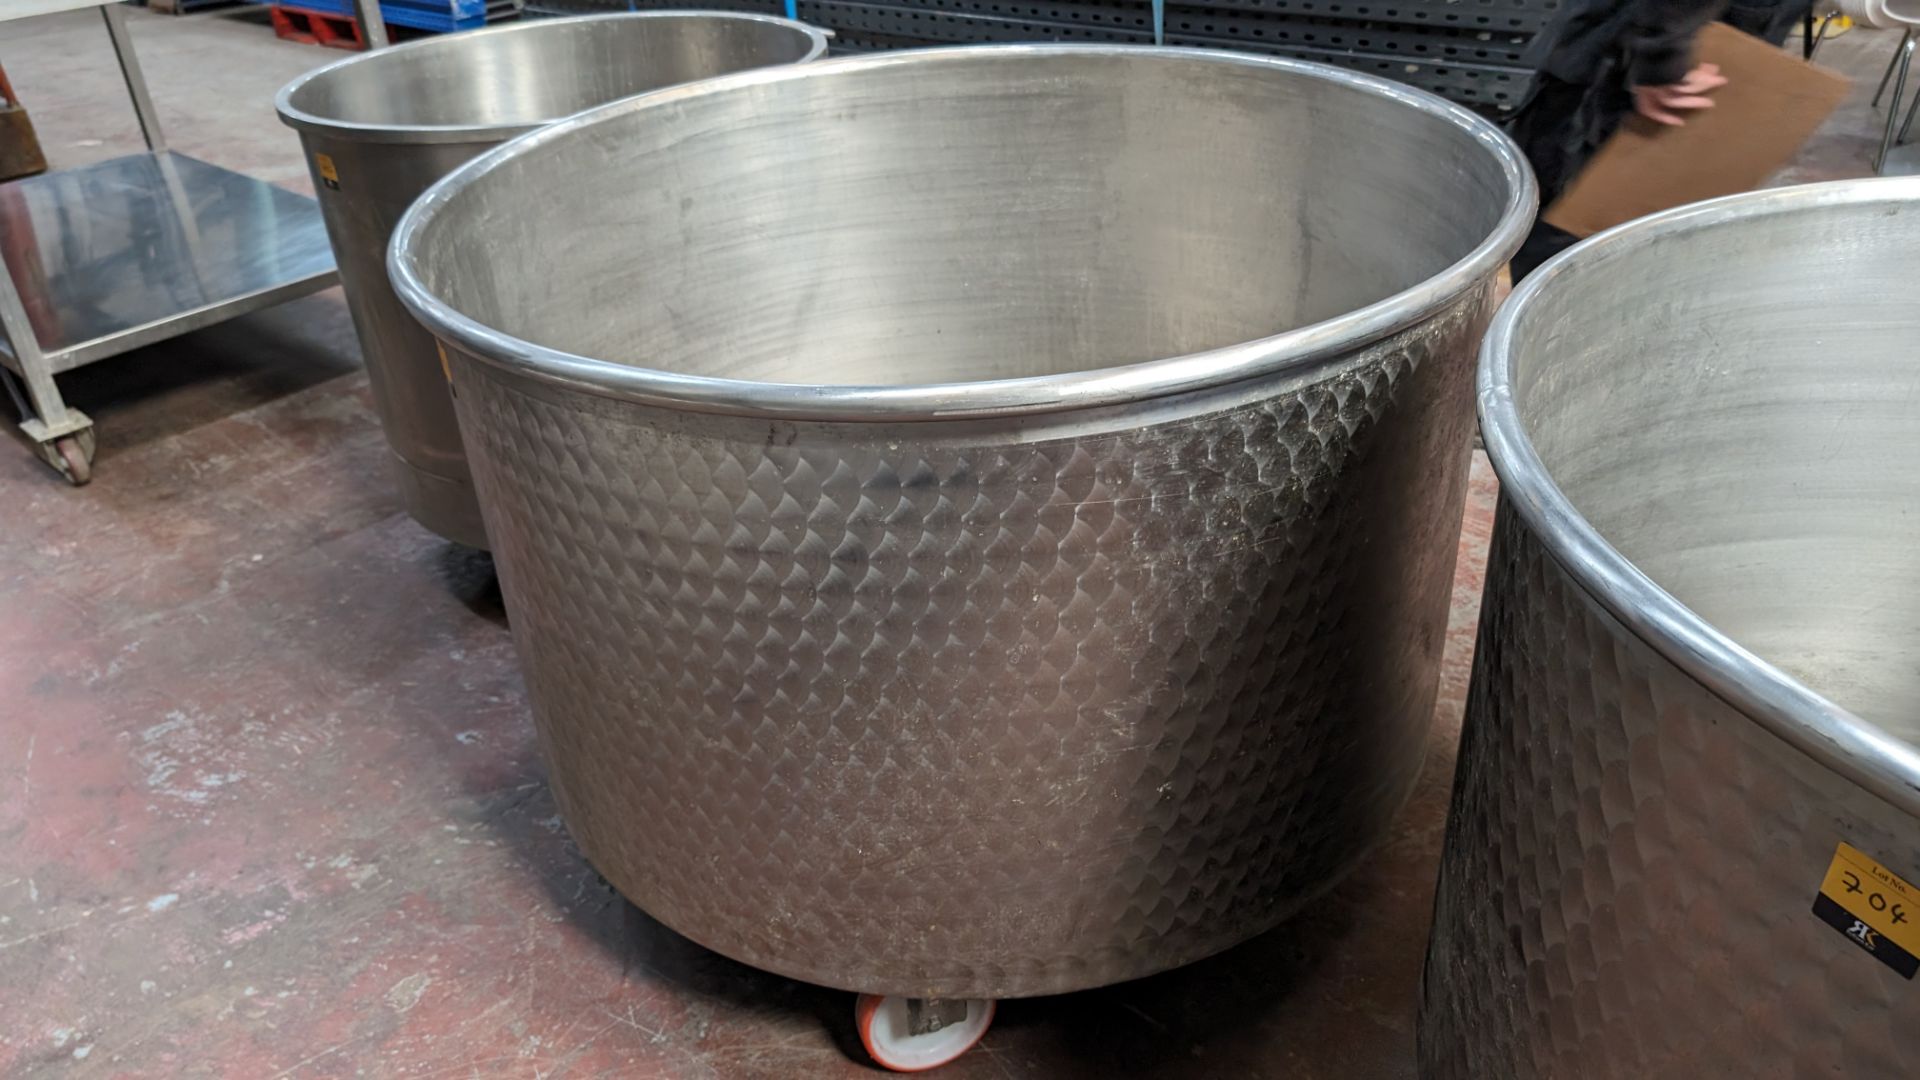 Wheeled tank in stainless steel - 600L capacity. Understood to have been bought in 2020 - Image 3 of 5